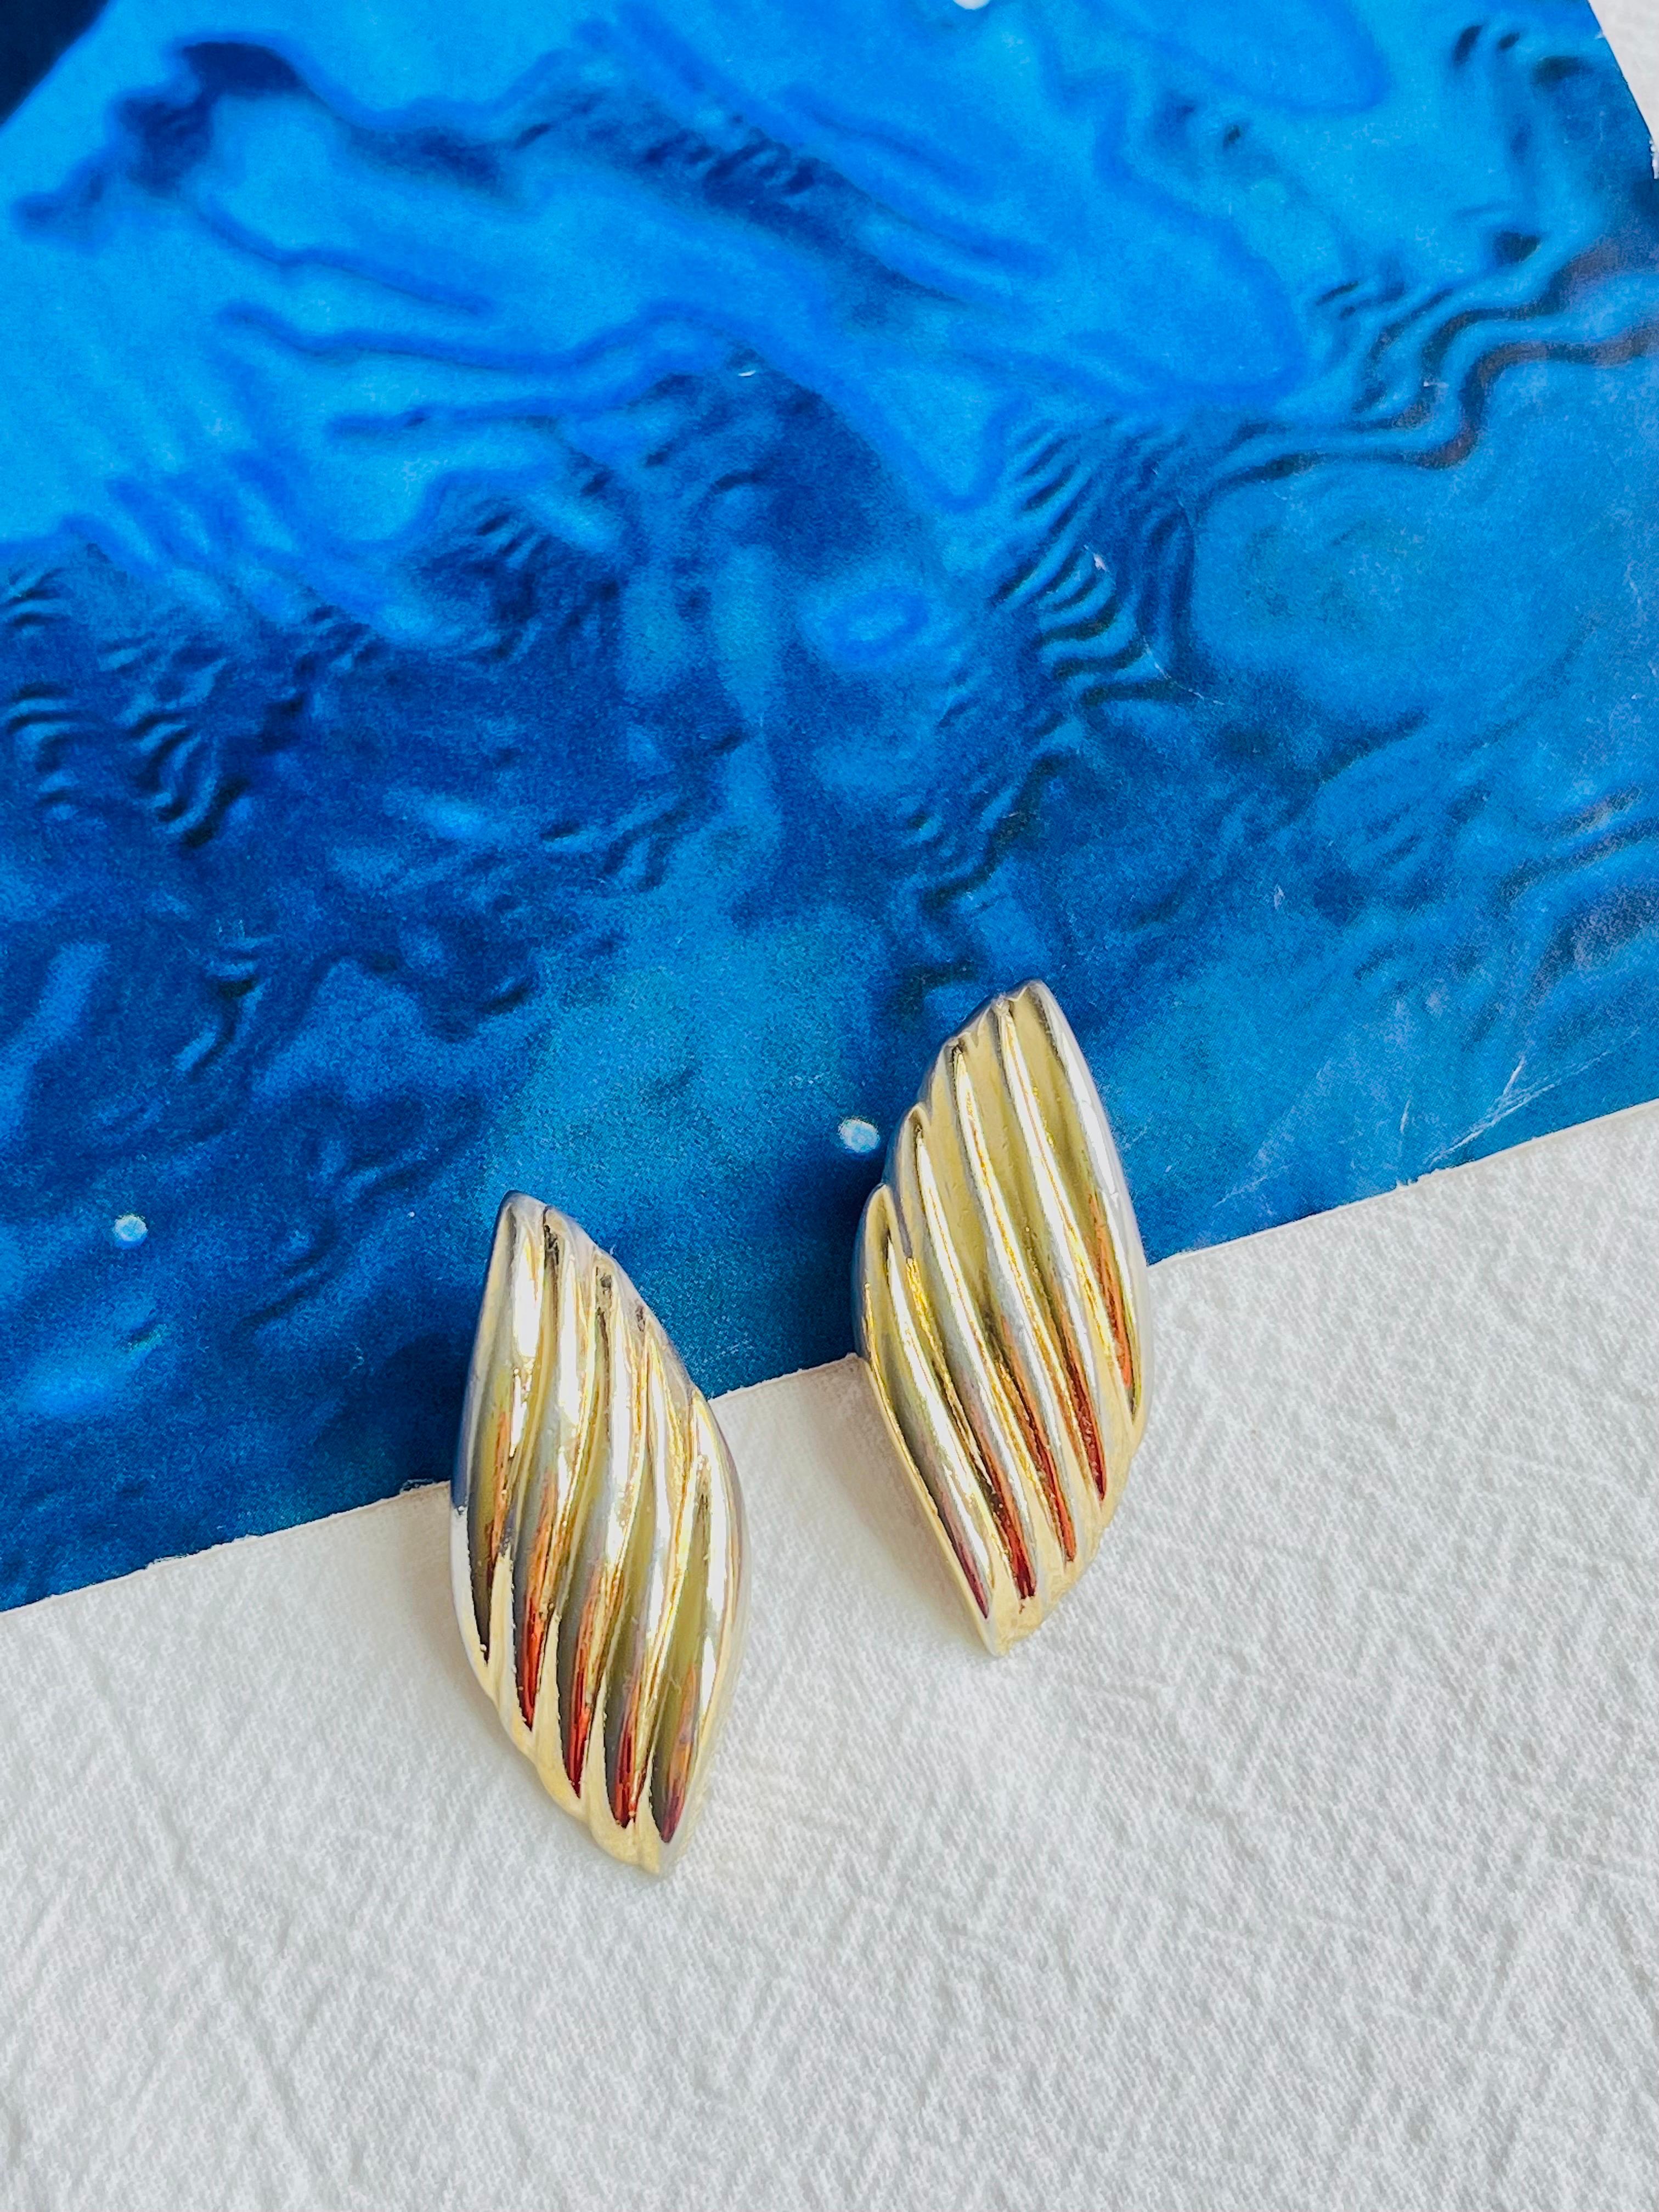 Christian Dior Vintage 1980s Large Spiral Shell Leaf Modernist Statement Clip Earrings, Gold Plated

Good condition. Light scratches, colour loss on front and back. 100% Genuine.

A very beautiful pair of earrings by Chr. DIOR, signed at the